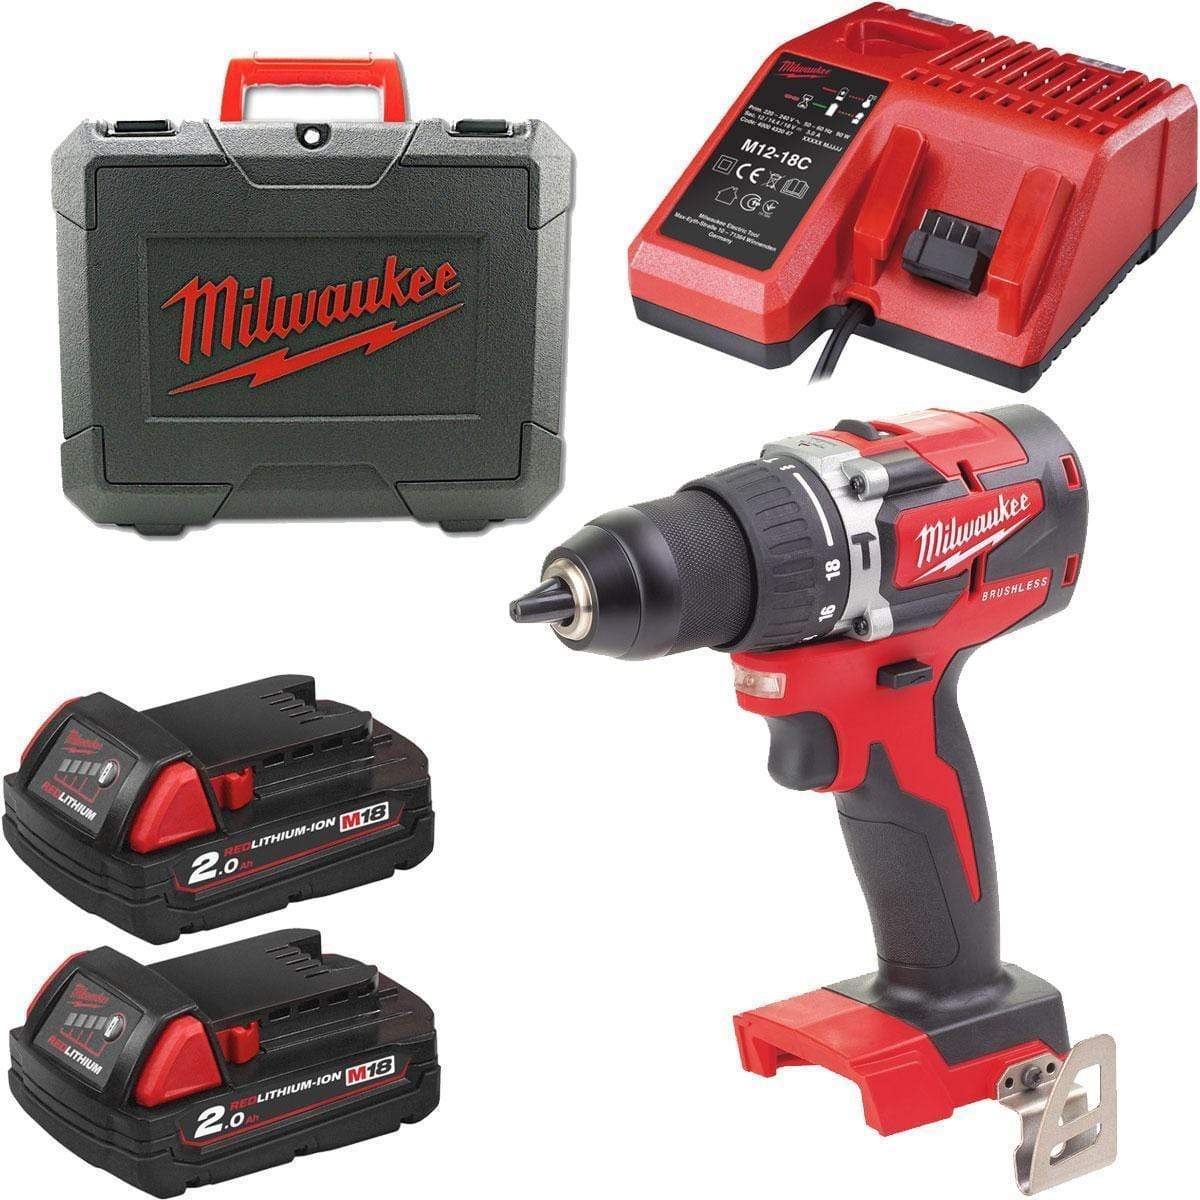 Milwaukee M18™ Cordless Compact Brushless Percussion Drill 18V - M18 CBLPD-422C | Supply Master | Accra, Ghana Tools Building Steel Engineering Hardware tool